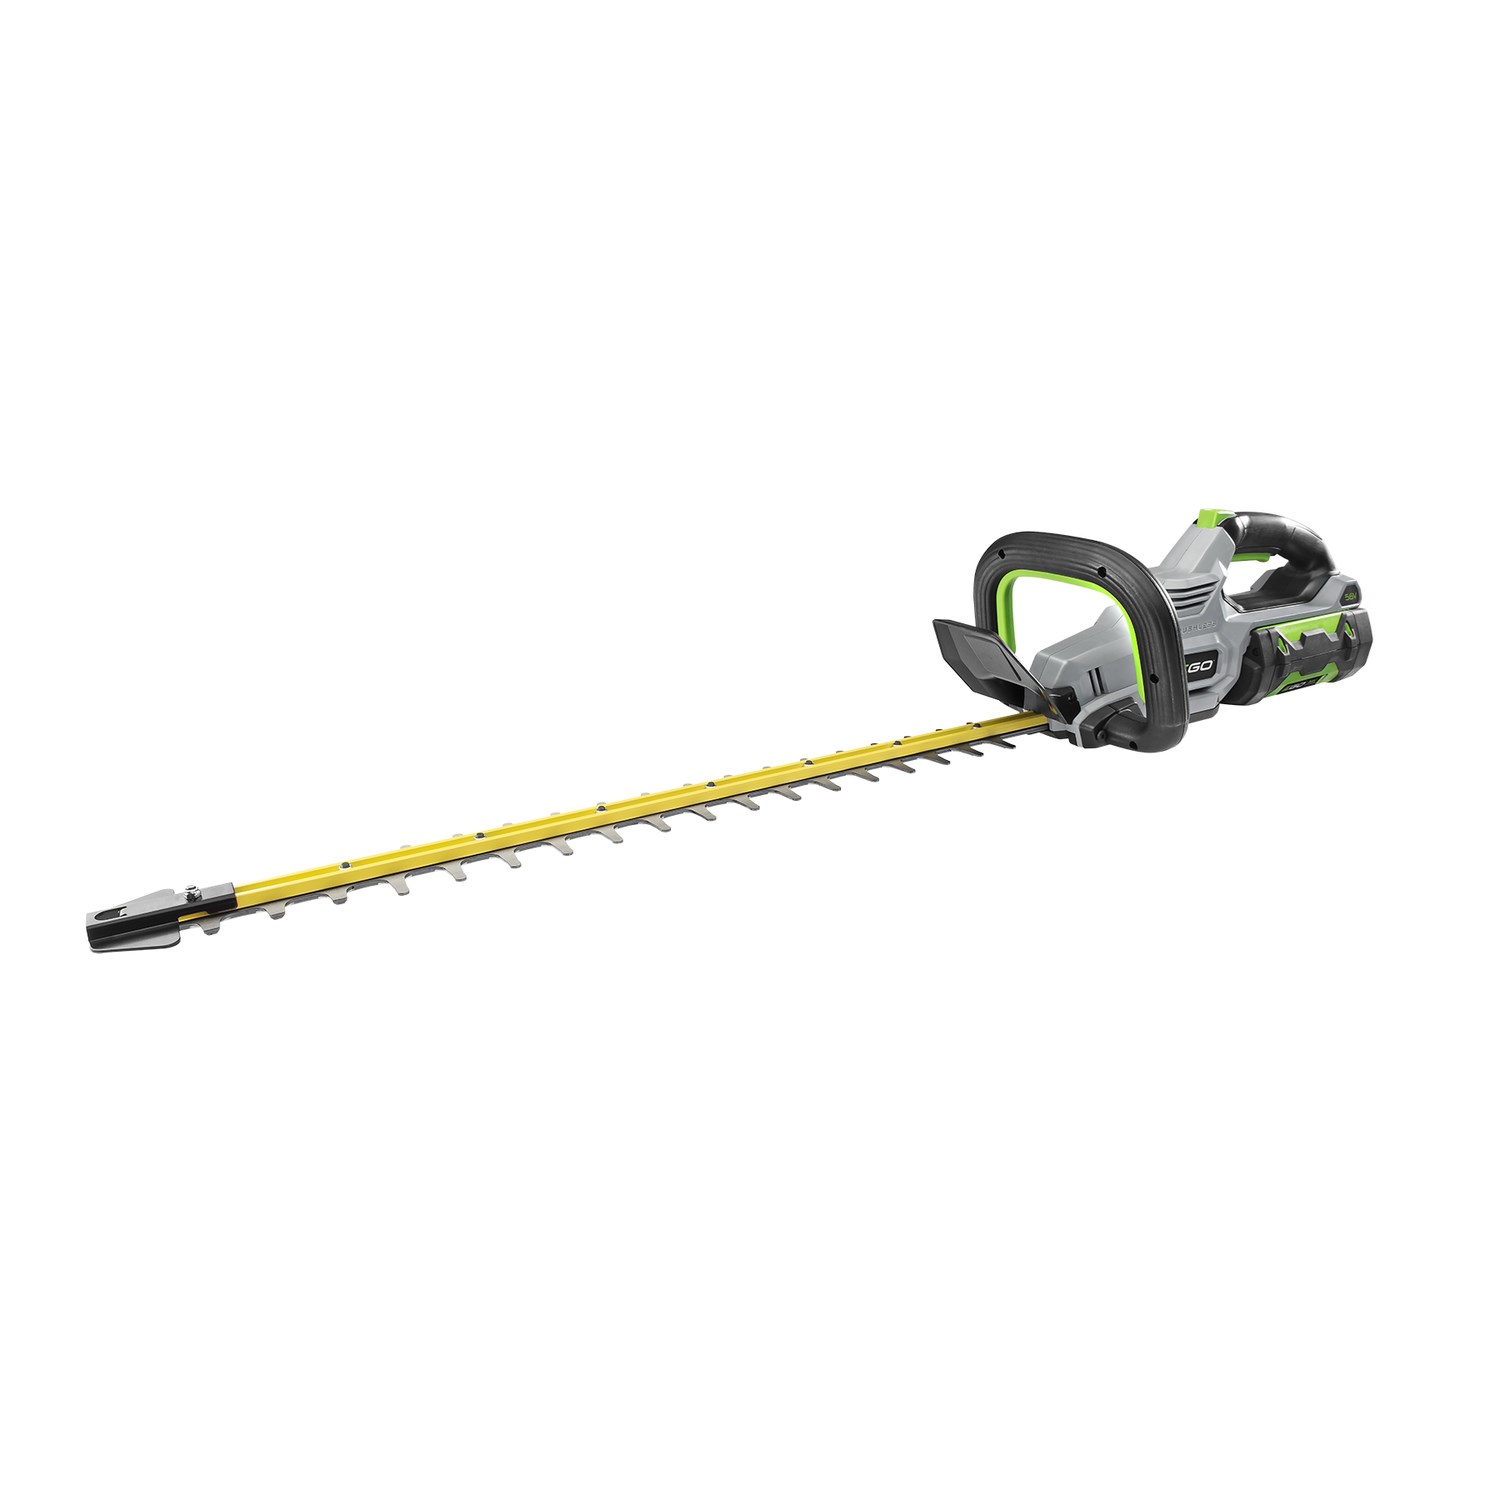 EGO Power+ HT2411 24 in. 56 volt Battery Hedge Trimmer Kit (Battery & Charger) - $180